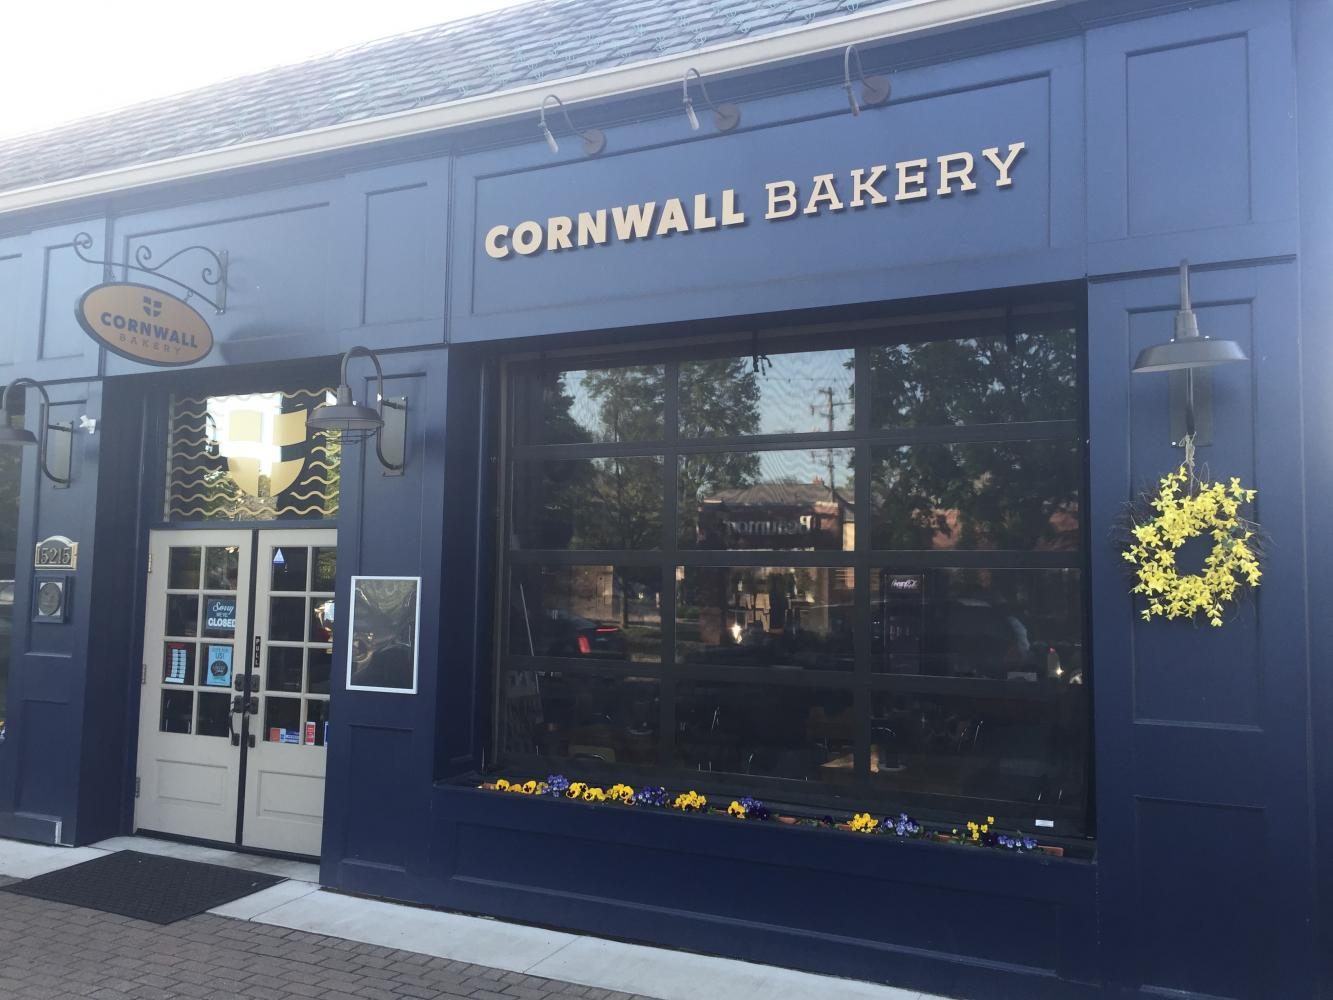 Cornwall Bakery: Small Town Grosse Pointe